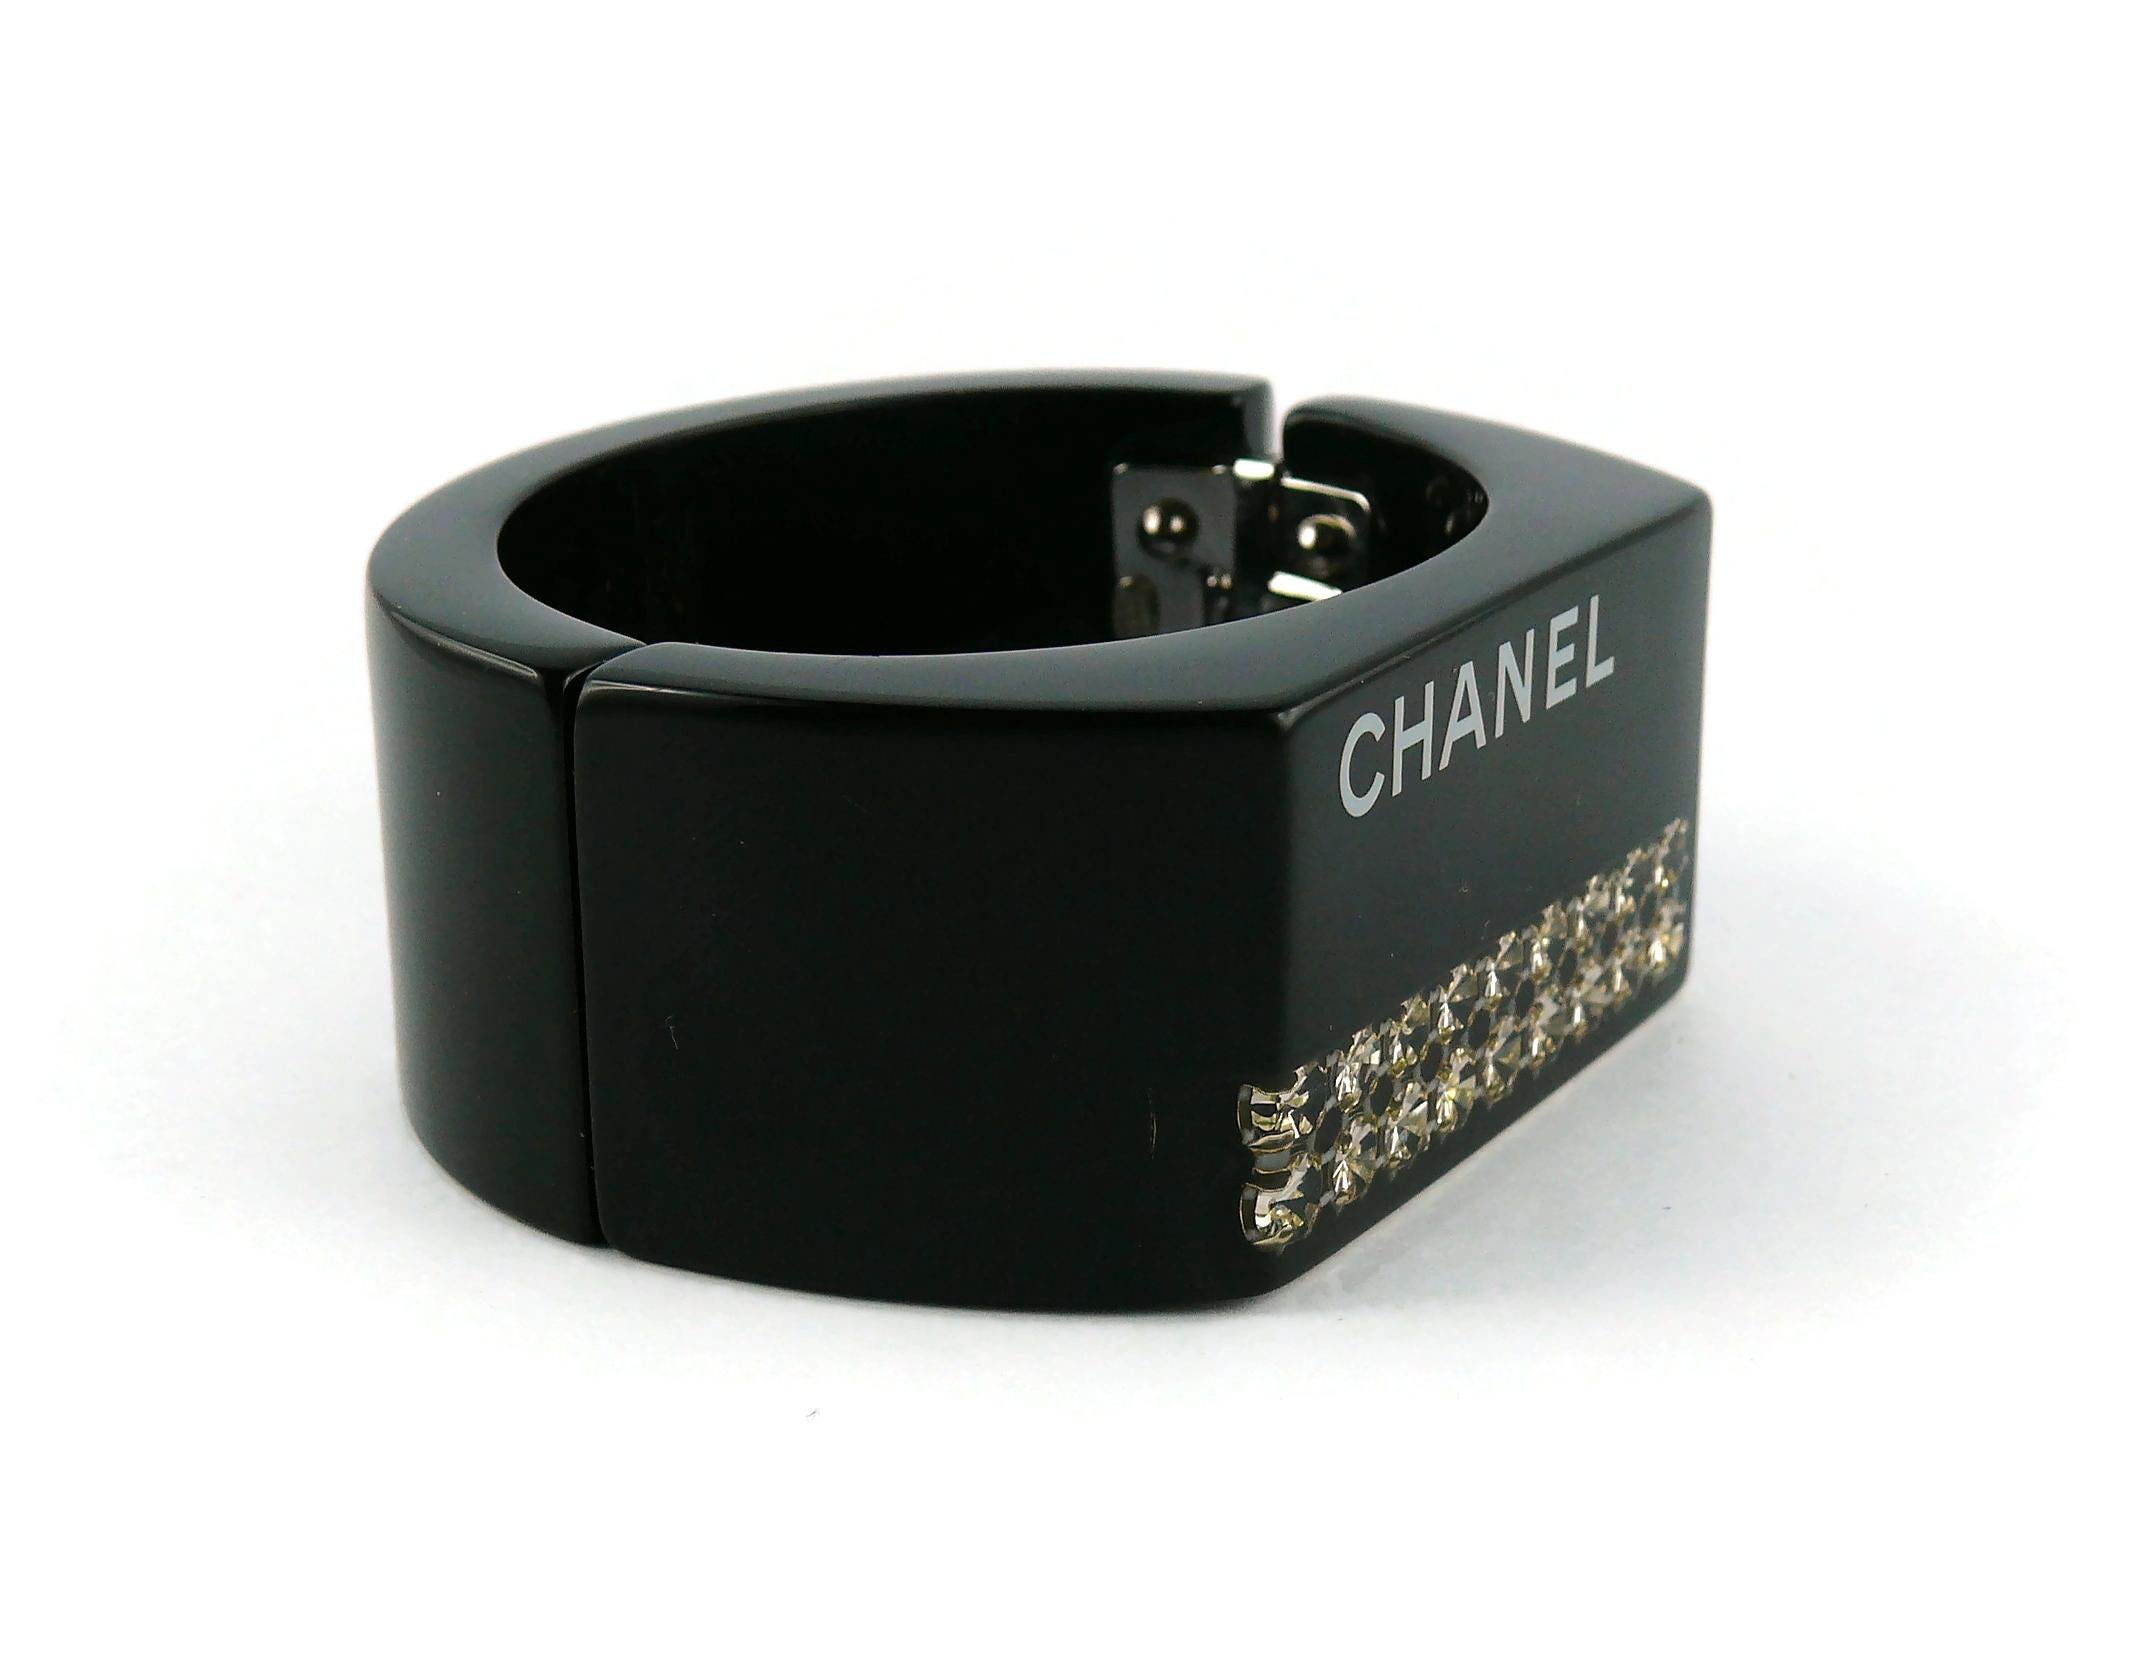 Chanel Black Resin Crystal Inlaid Clamper Cuff Bracelet For Sale 4